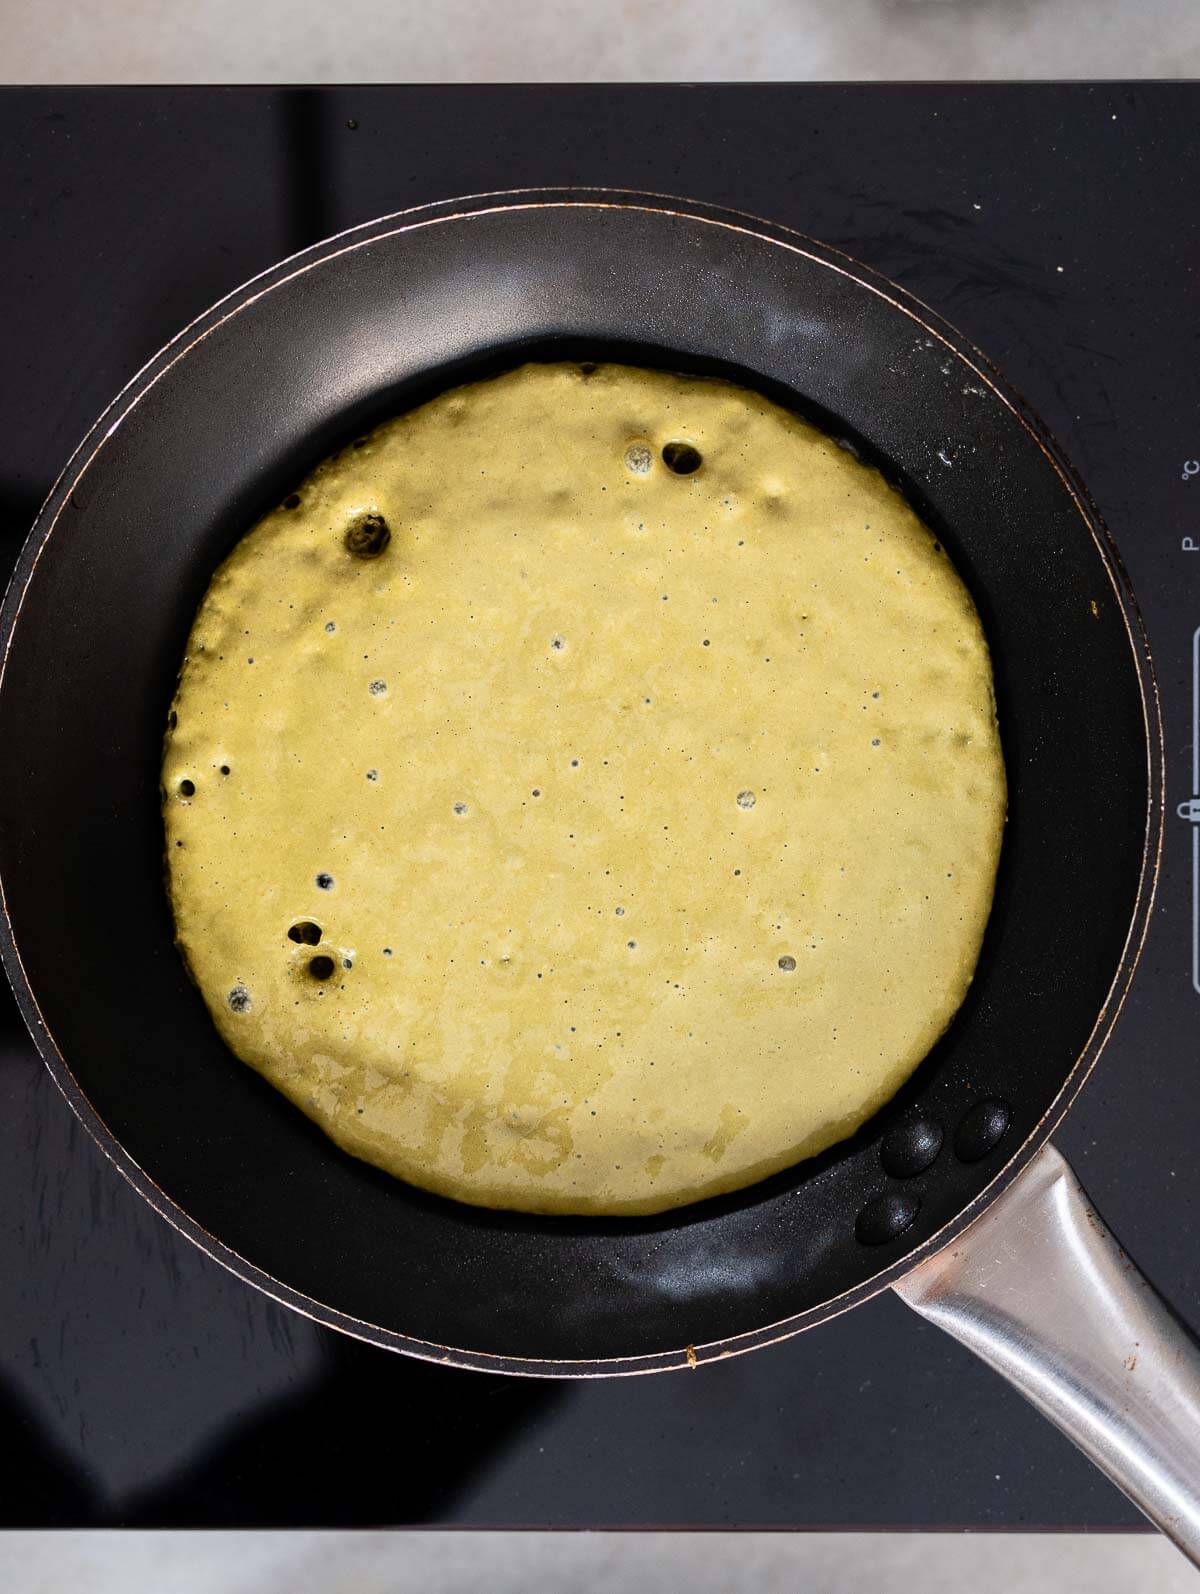 Matcha pancake batter in a skillet, with the first bubble popping on the surface.